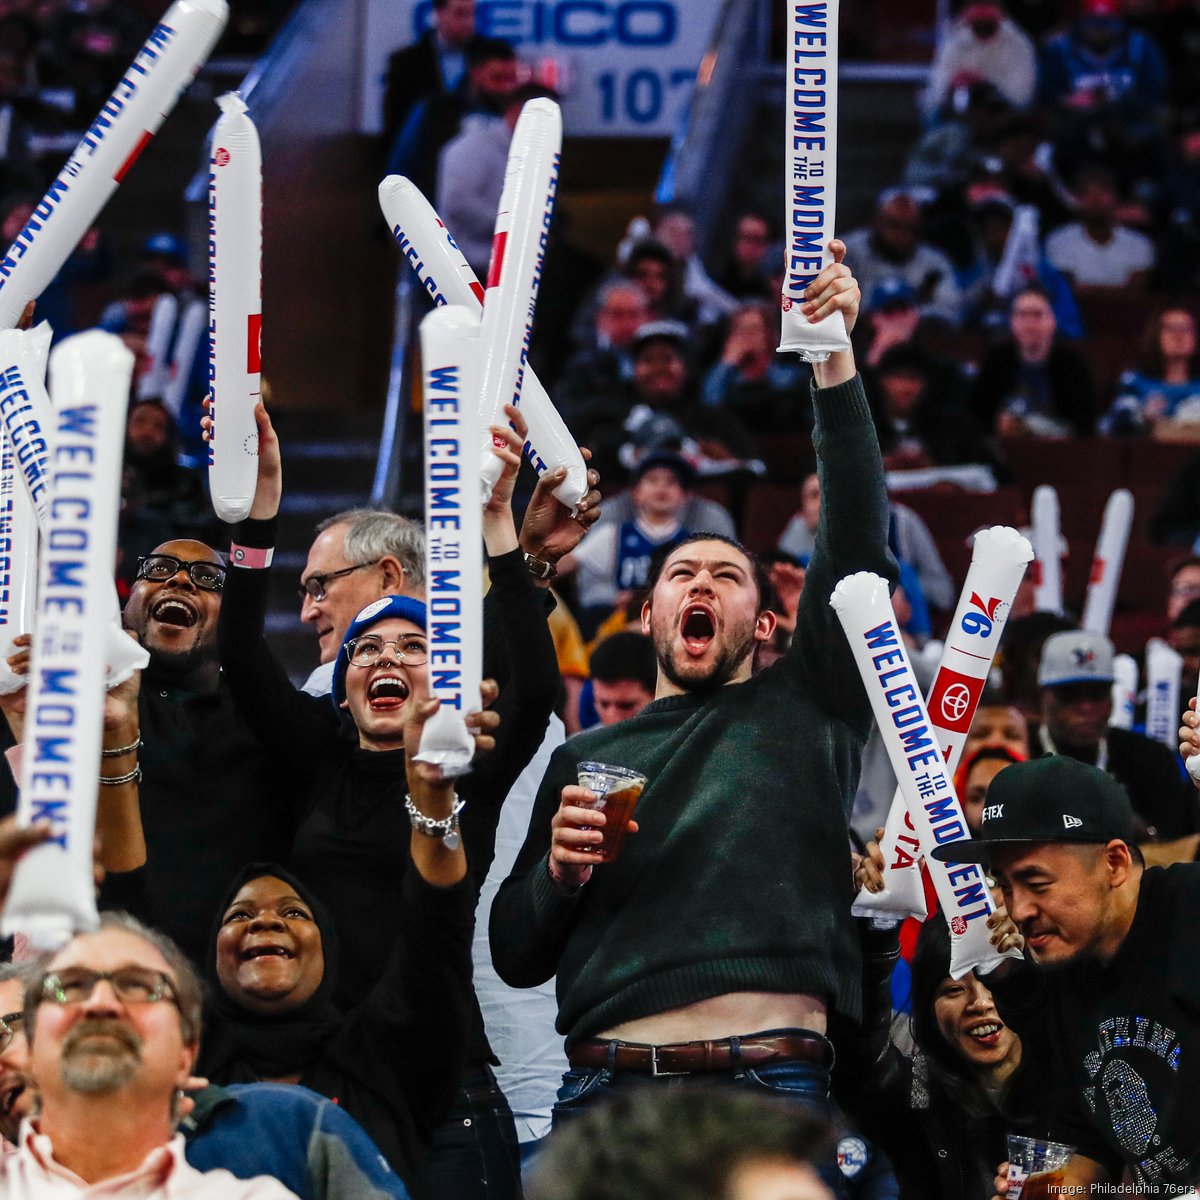 76ers first NBA team to land jersey sponsorship with StubHub – The